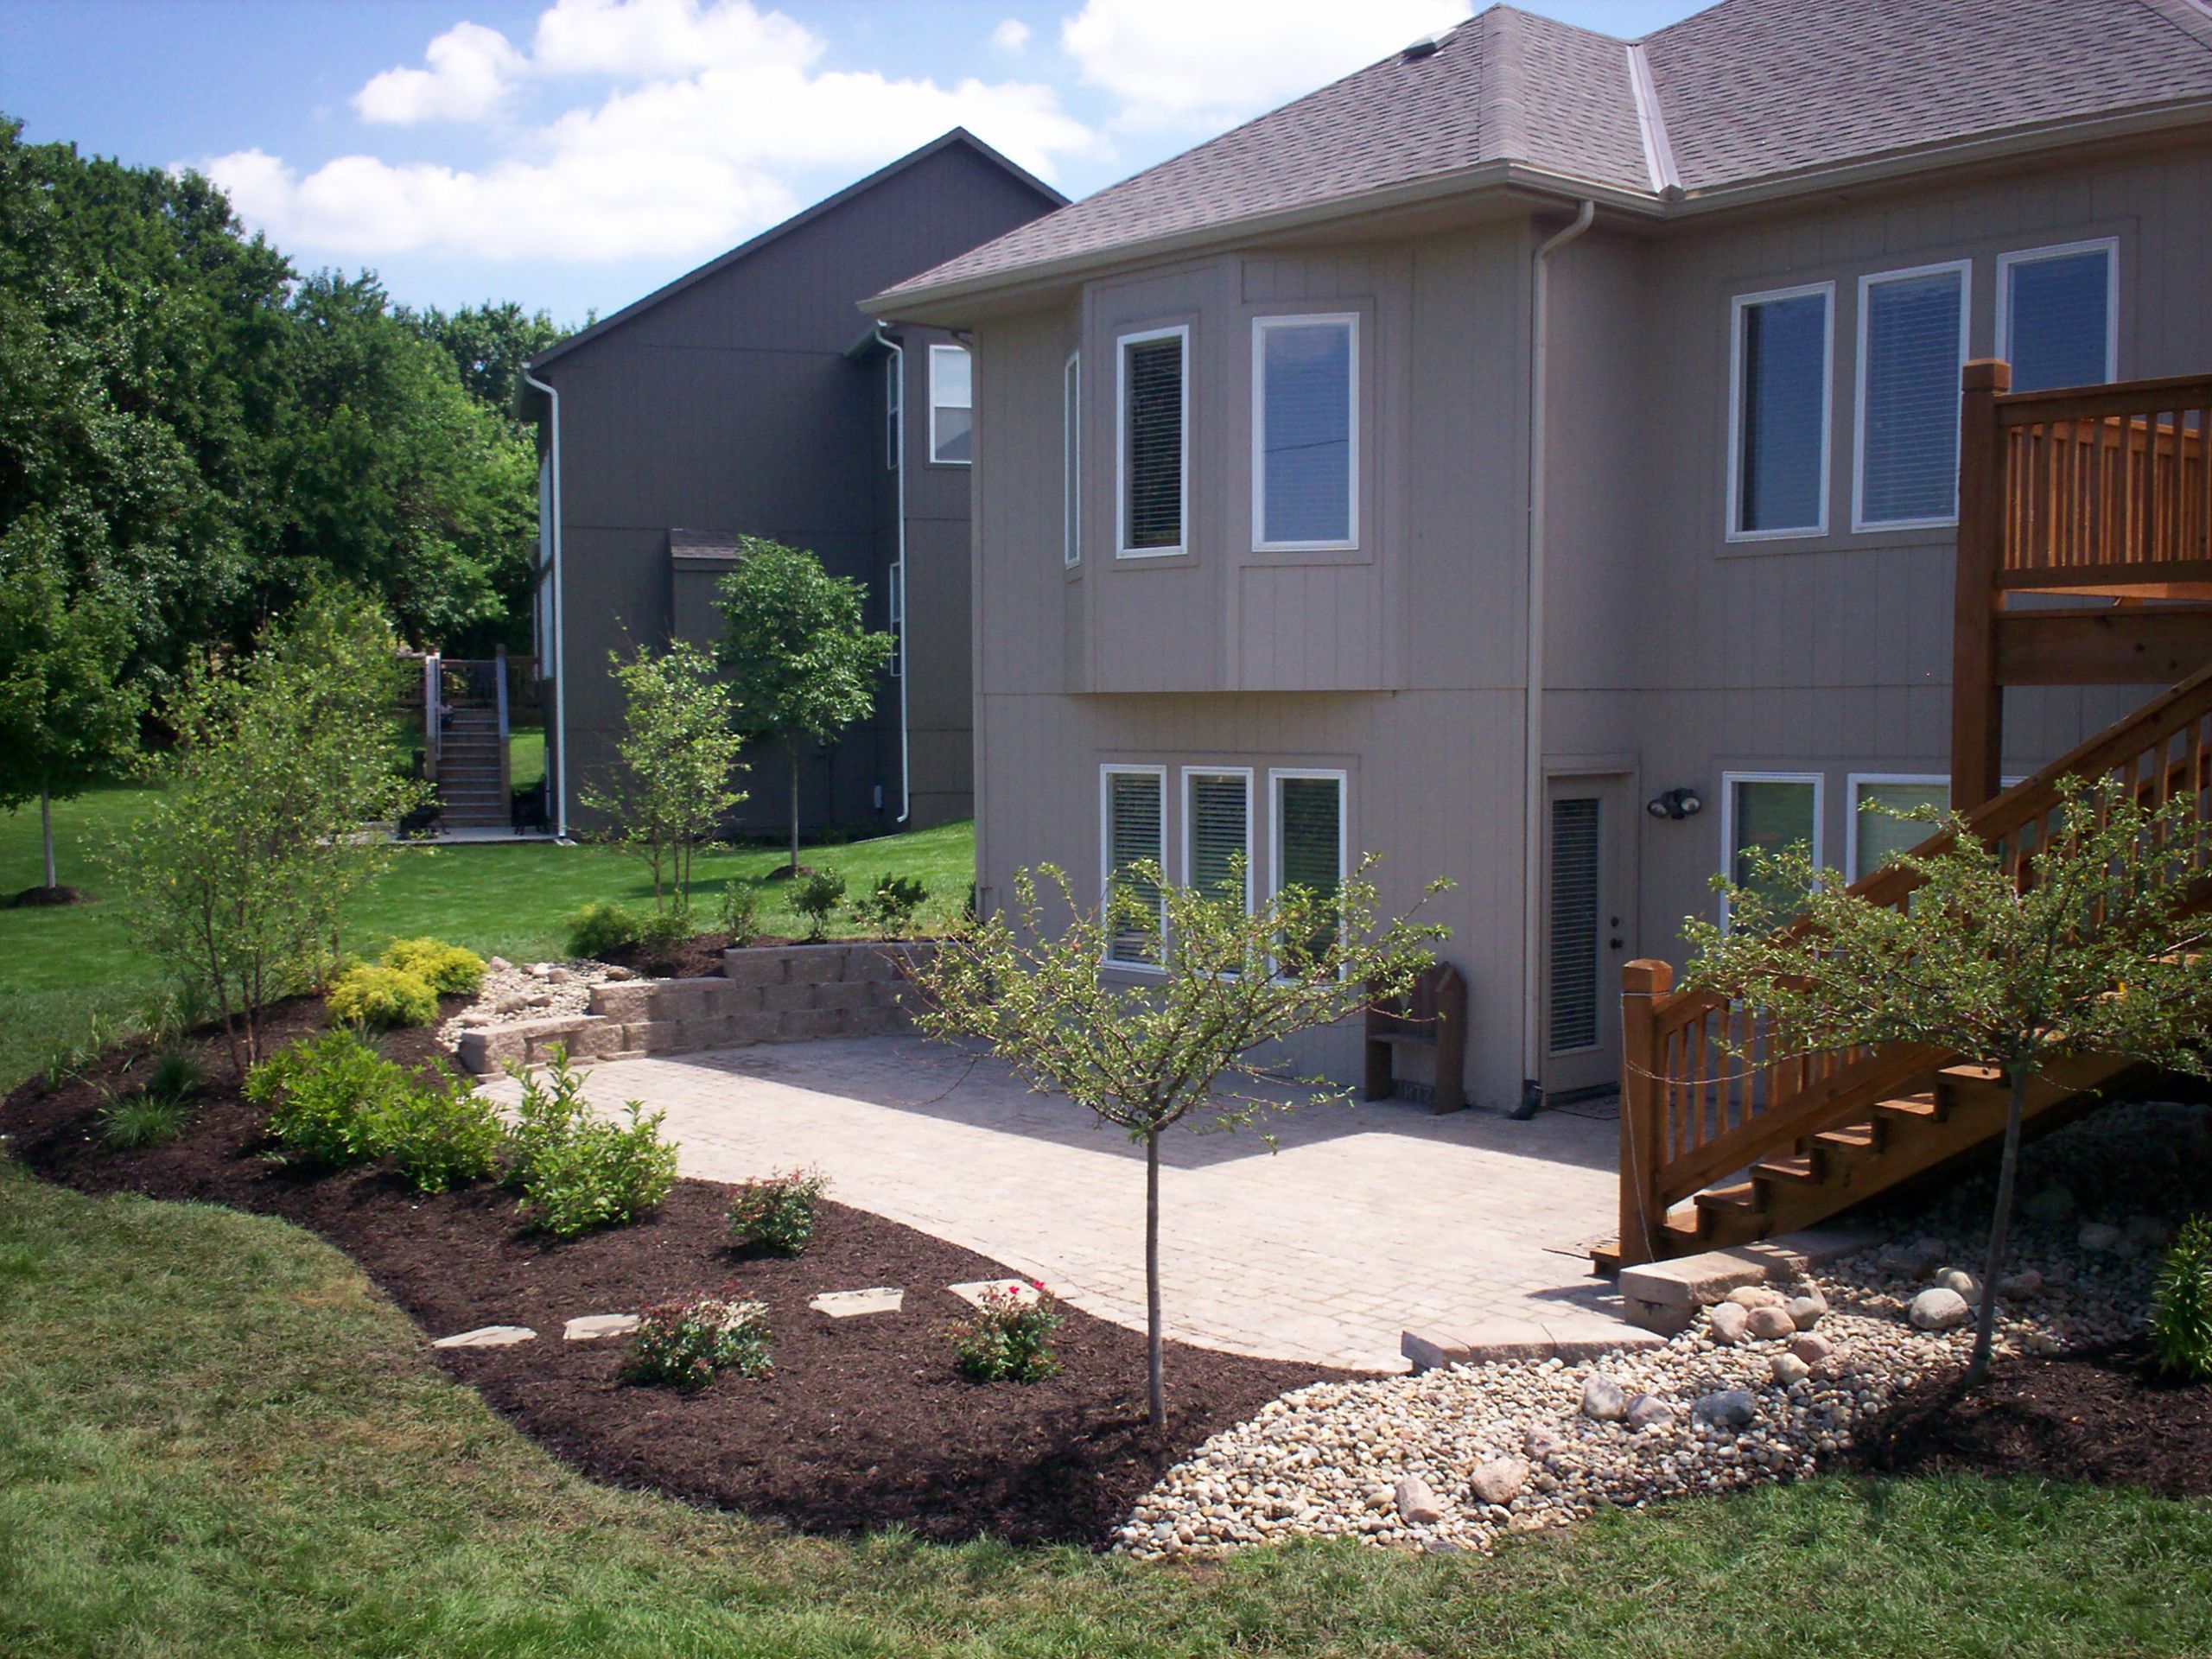 Landscaping Around Patio
 Patios and Retaining Walls